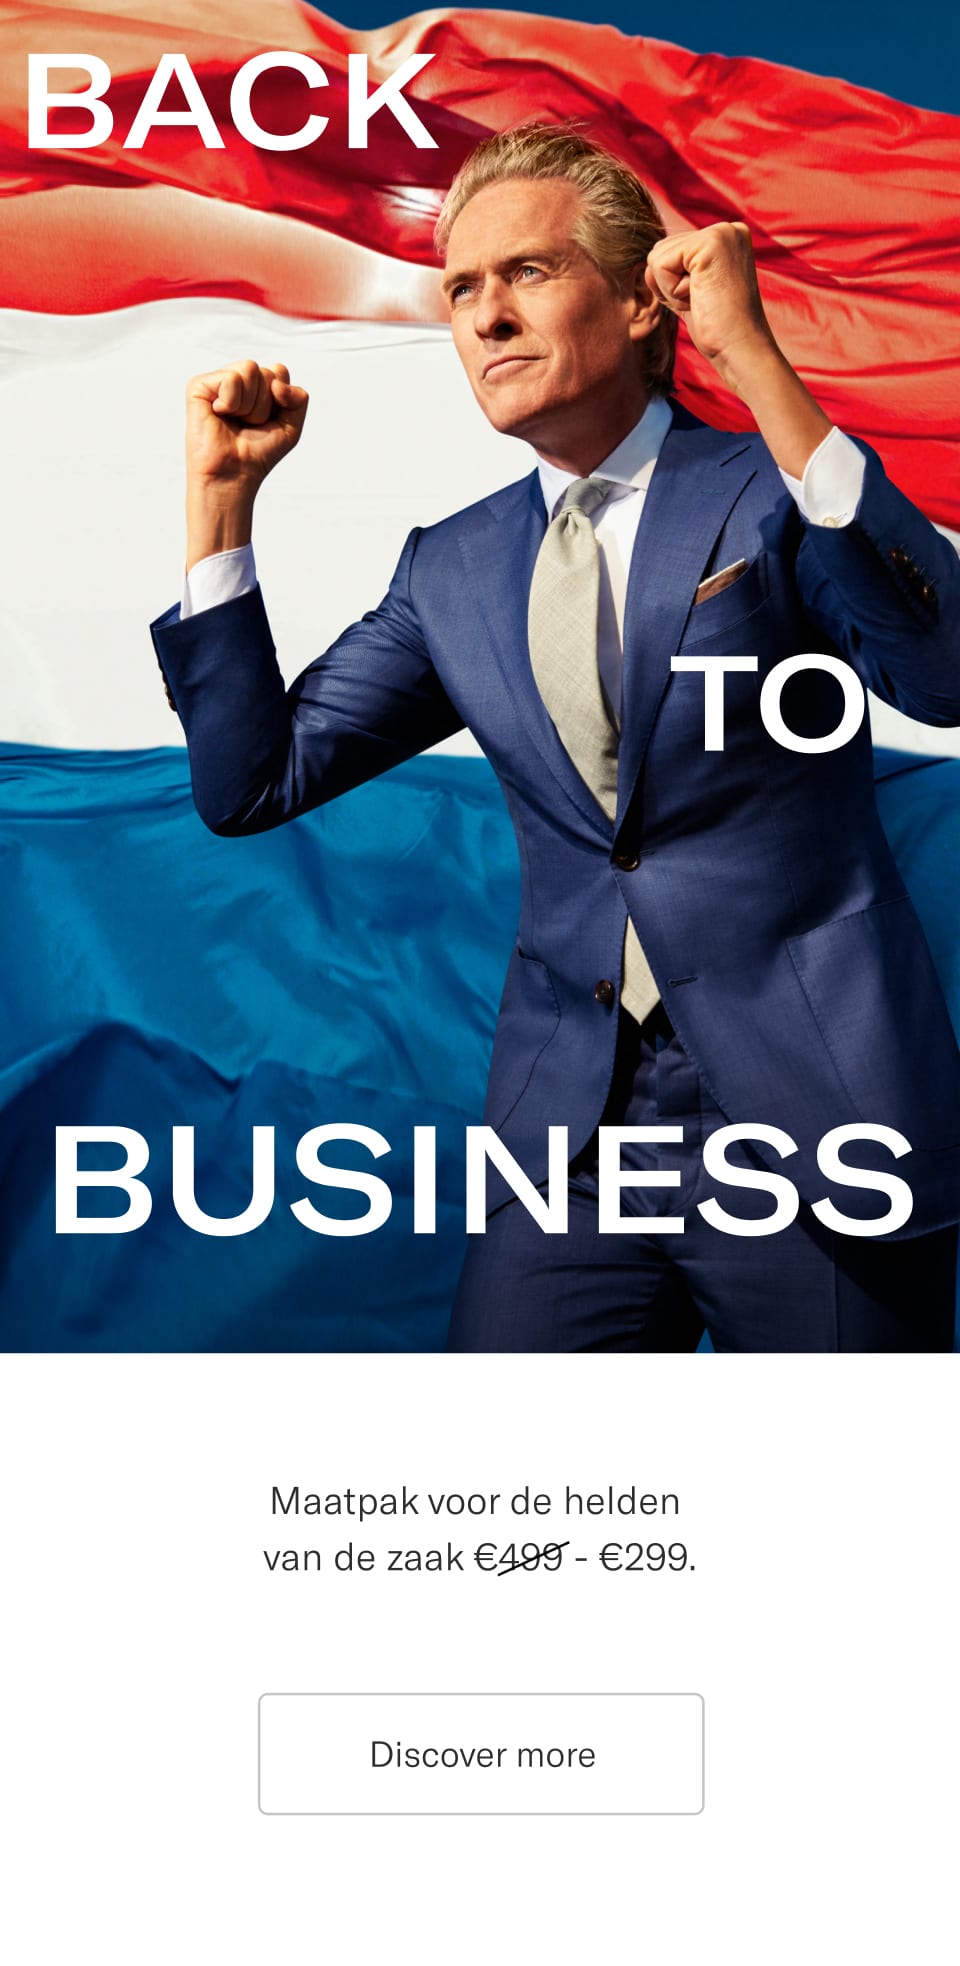 Back to Business | Custom Made suits at €299 EUR